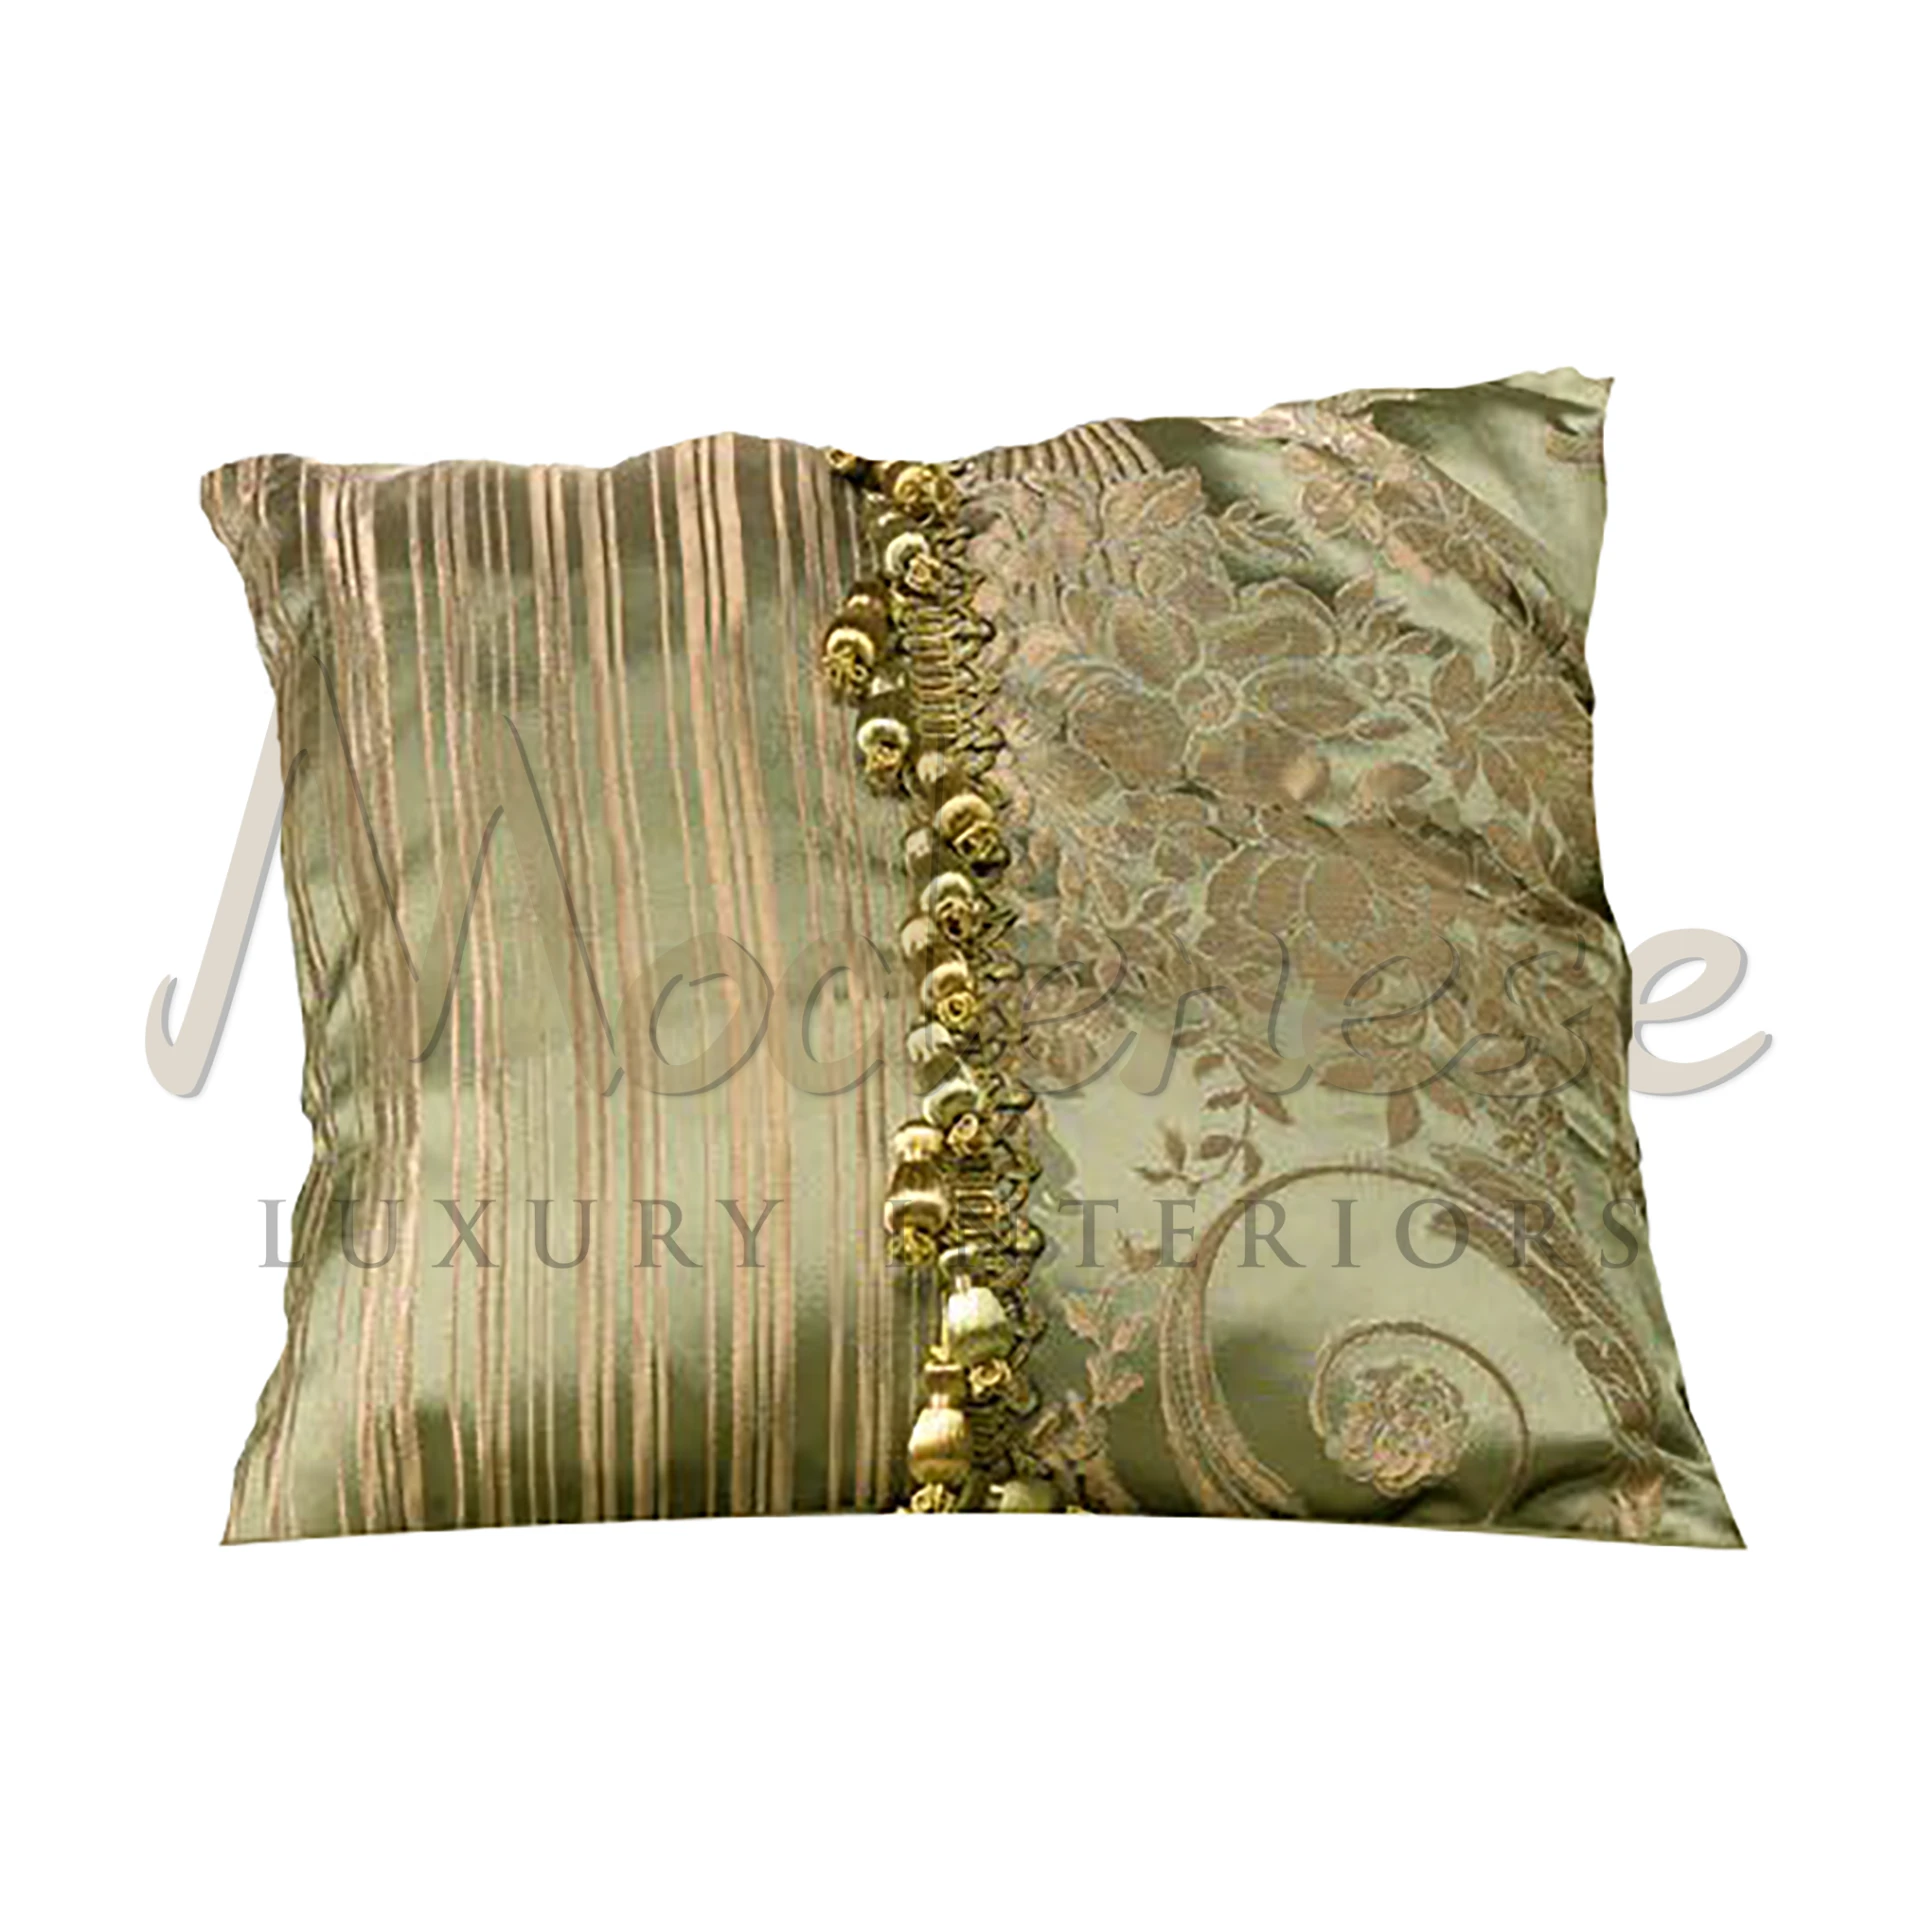 Royal Green Pillow by Modenese: Elegance in every detail, with luxurious embellishments like tassels and fringes.